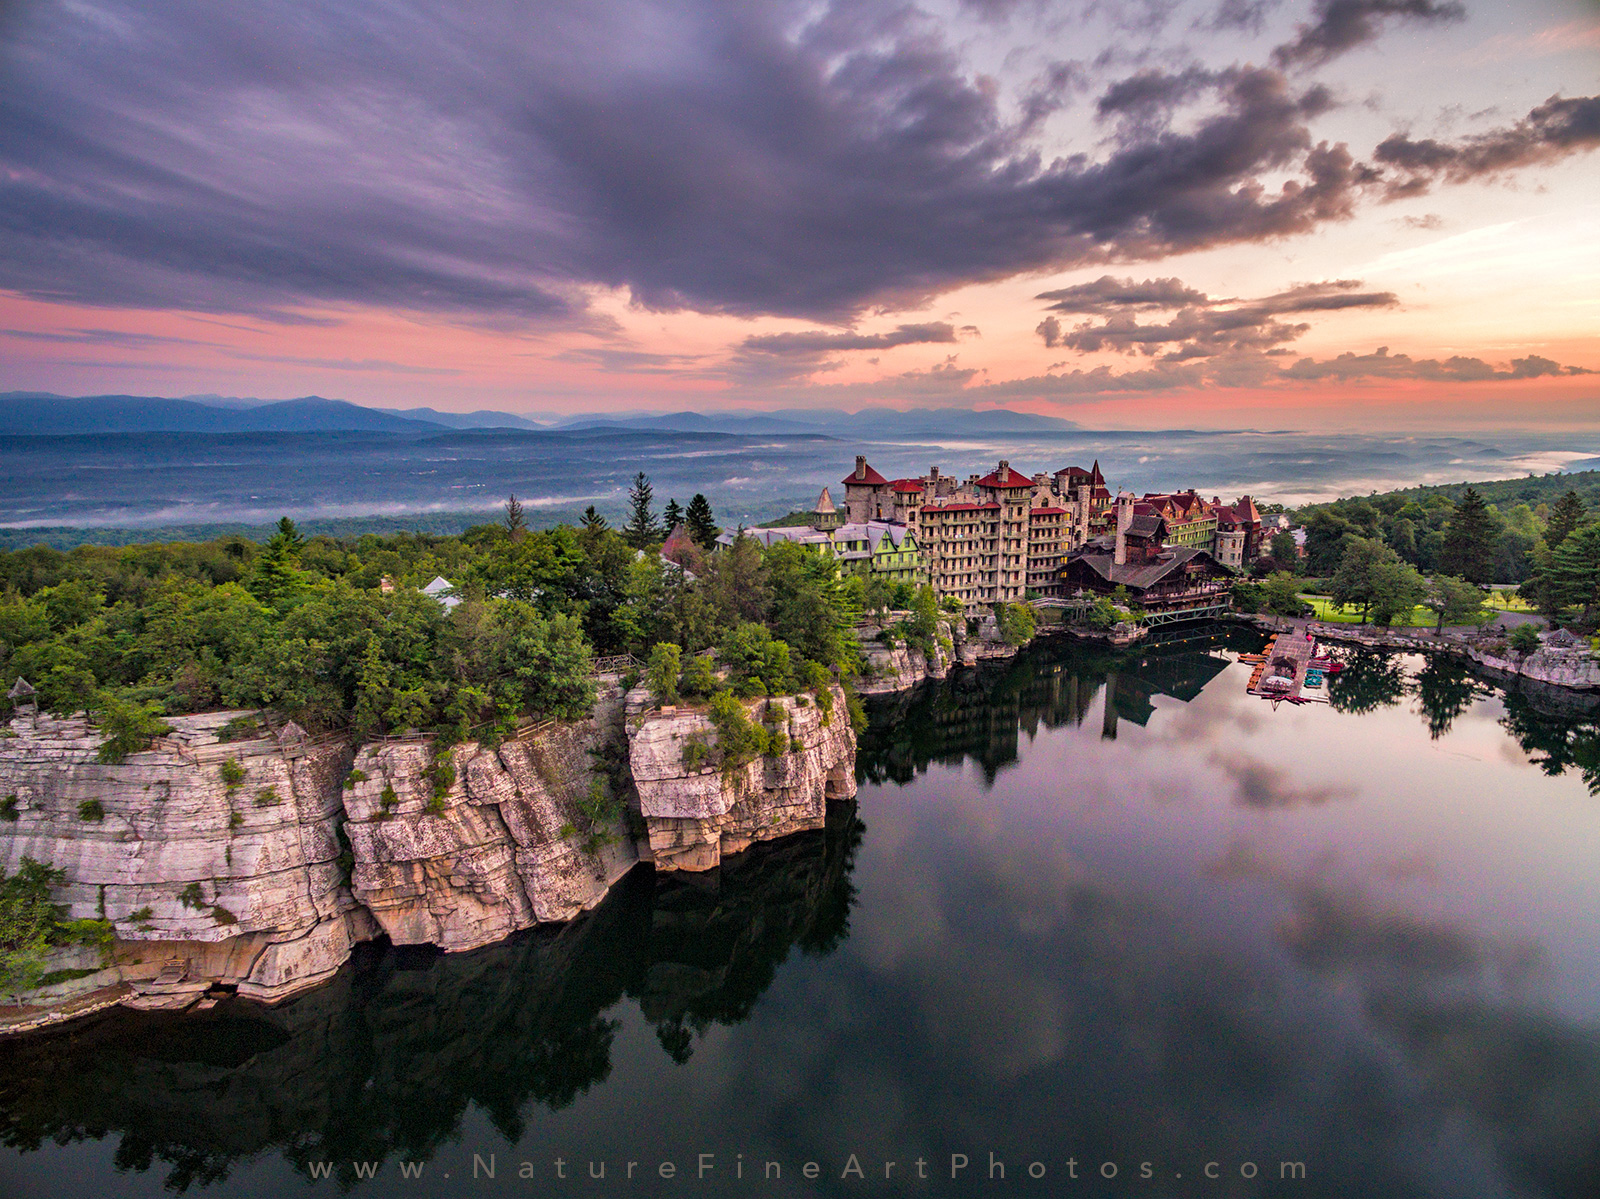 Mohonk Mountain House (New York) Photo for Sale | Nature Photos